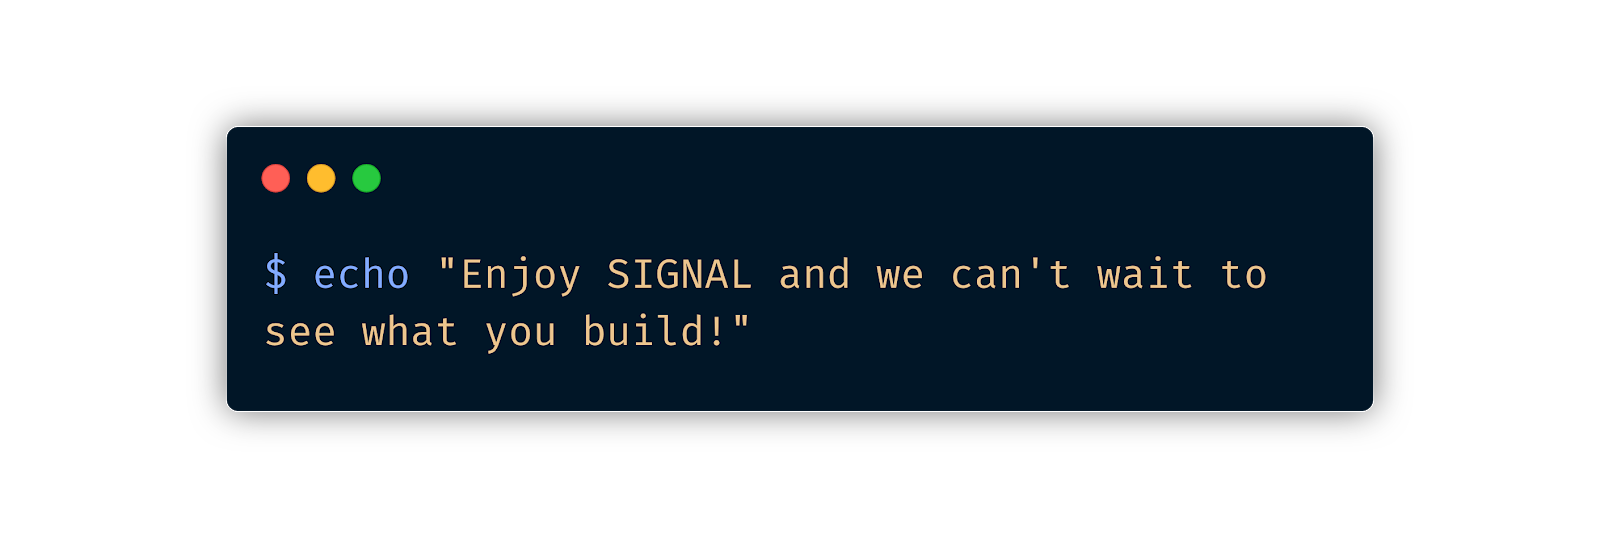 terminal screenshot reading "echo Enjoy SIGNAL and we can&#x27;t wait to see what you build!"